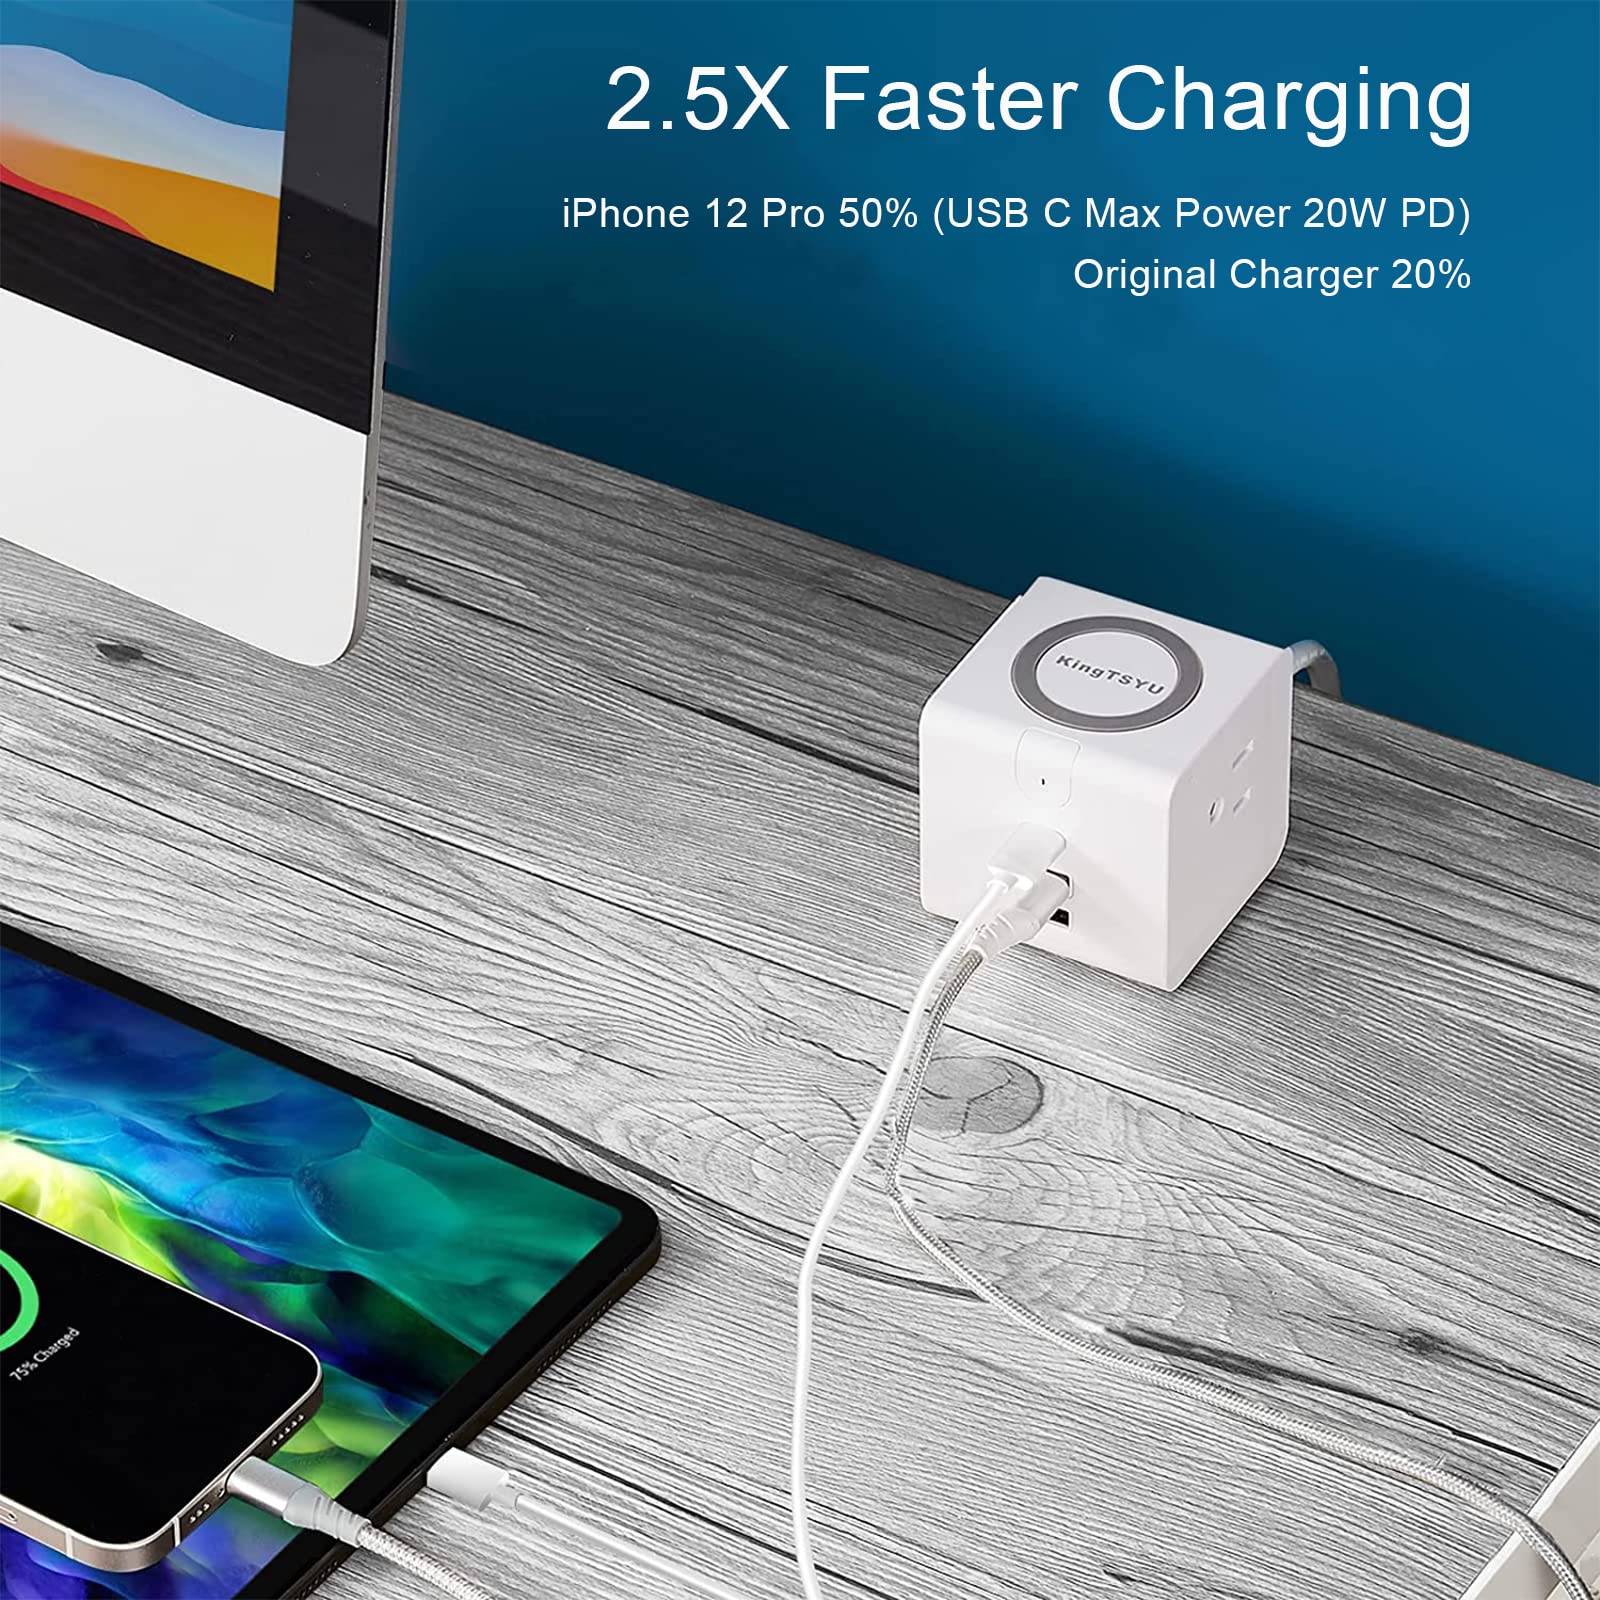 Power Strip with USB C Ports, KingTSYU Travel Surge Protector Tower Extension Cord with PD 20W/2USB A/2AC Outlets/Phone Wireless Charger,Fast Charging Power Delivery for Dorm Home Office